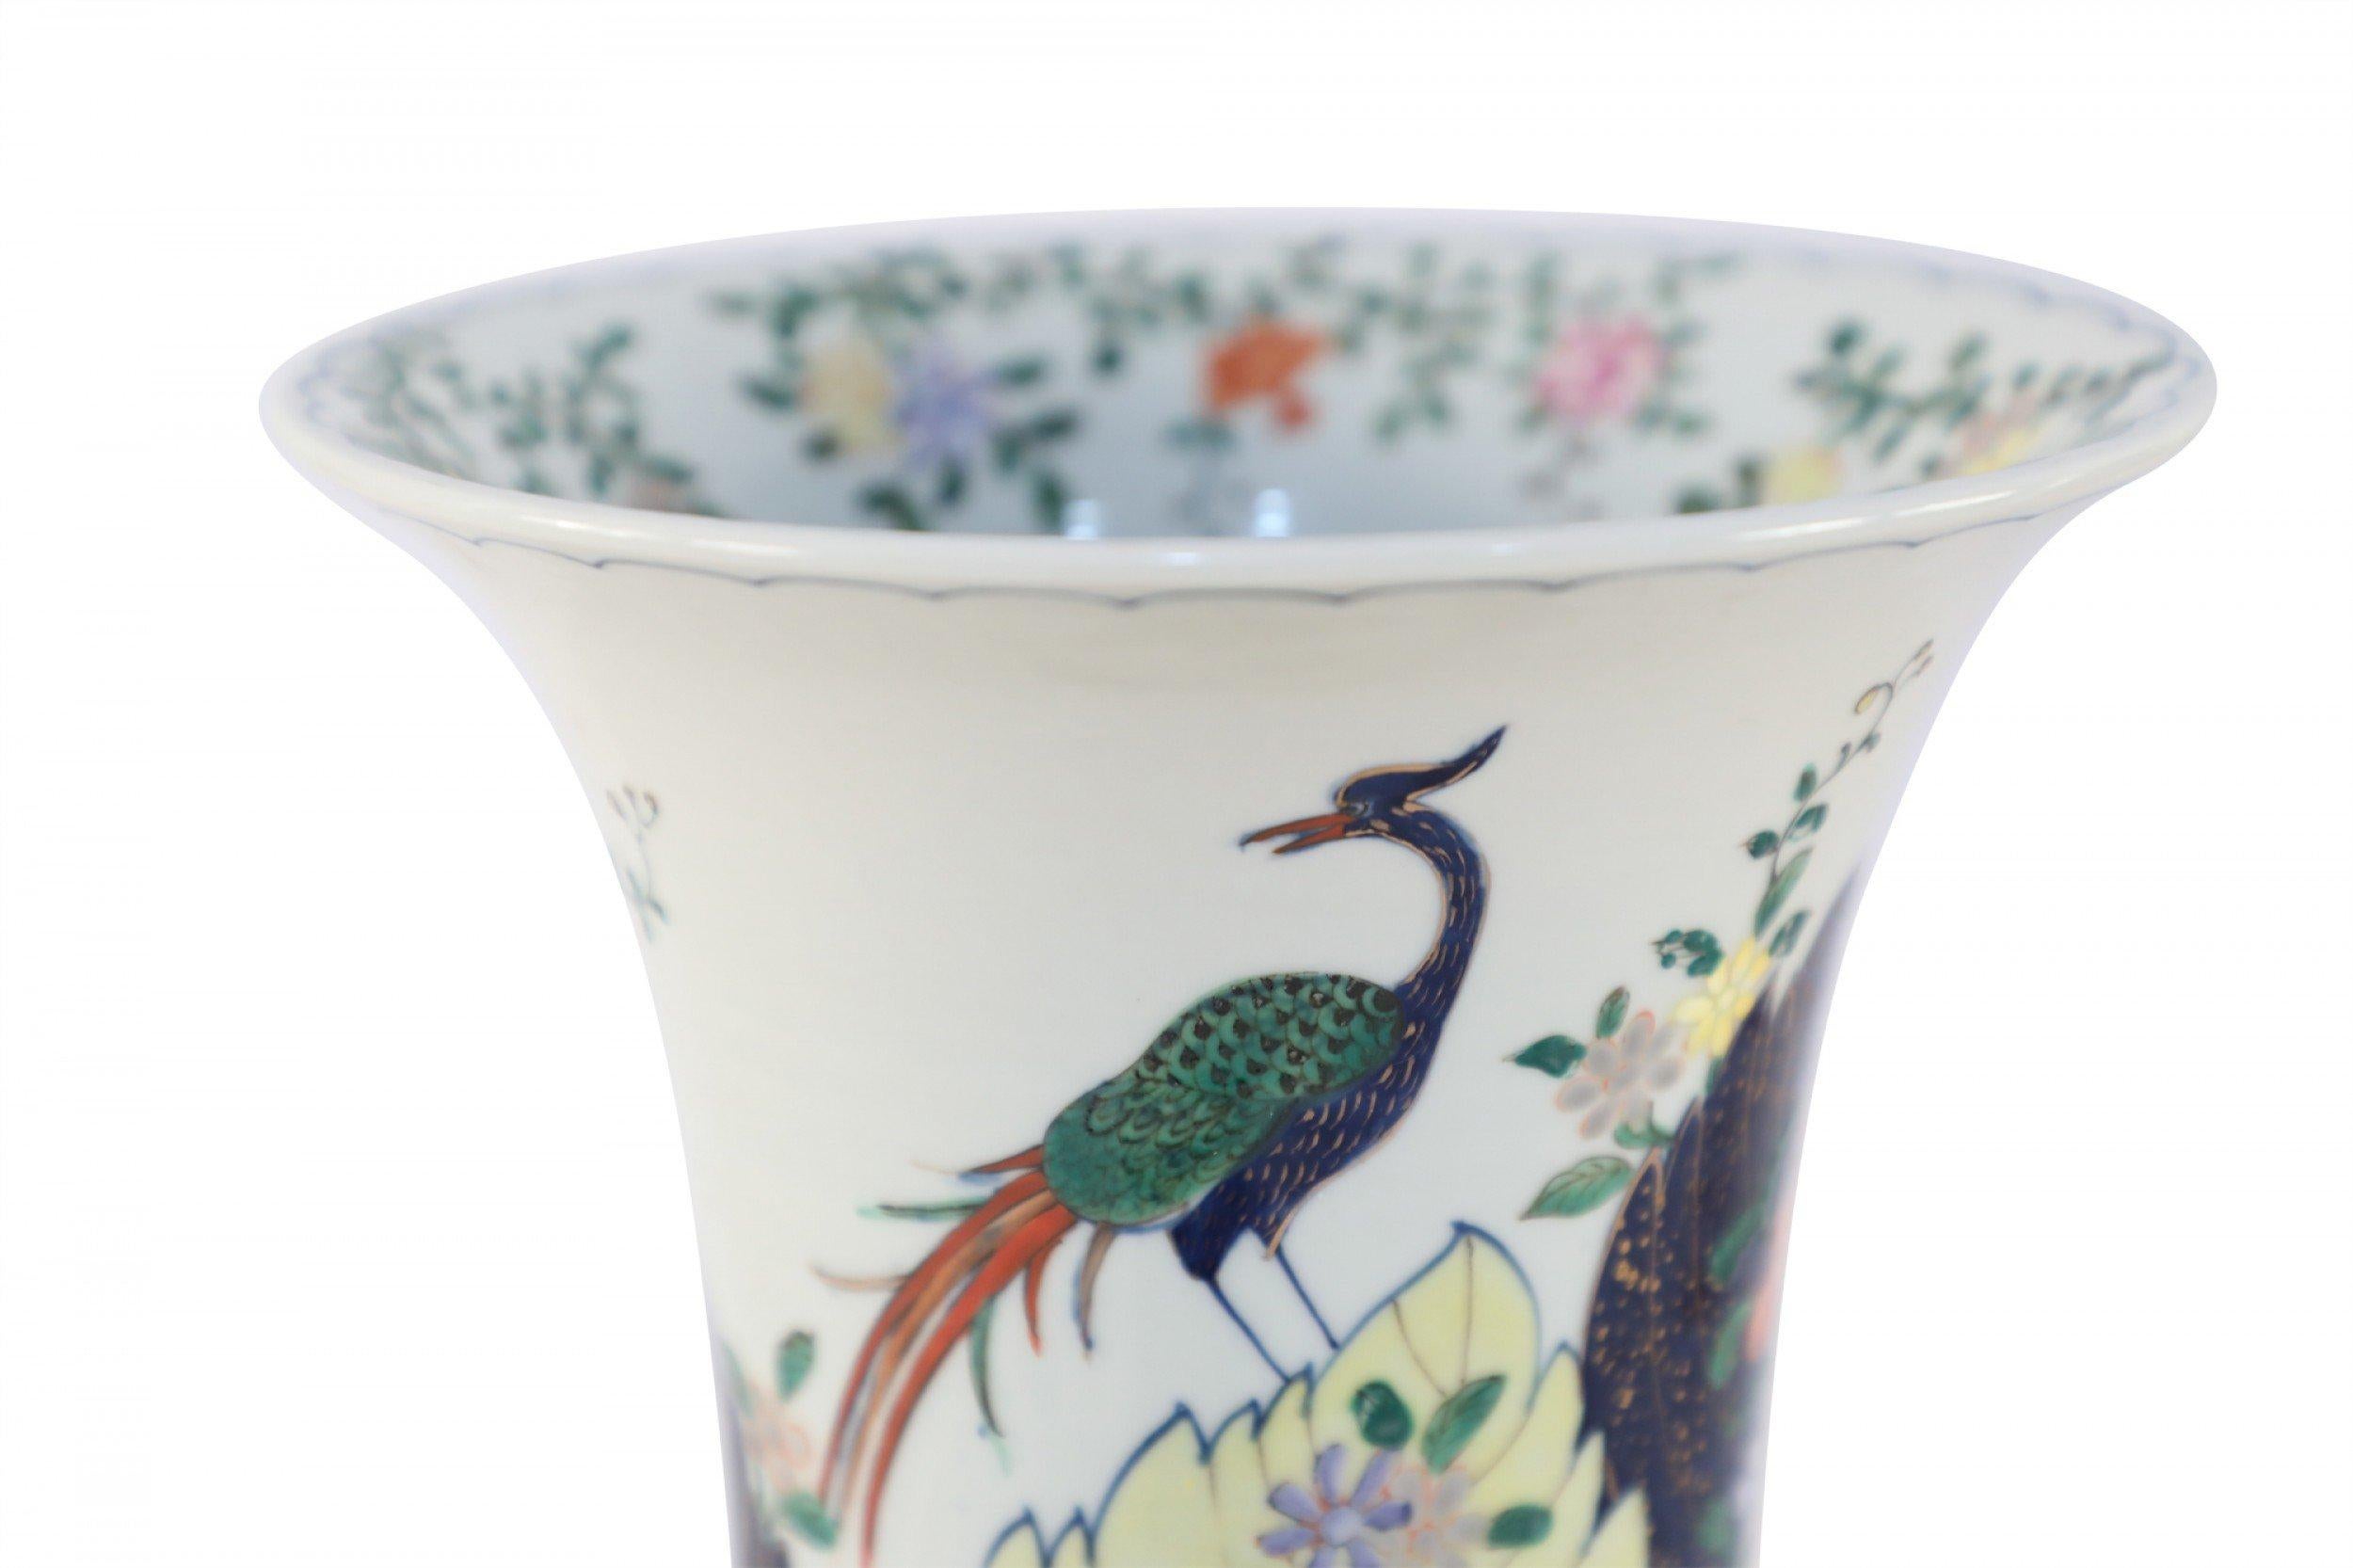 Chinese white porcelain fluted vase with a tall, cylindrical form decorated in large scale dark blue leaves outlined in gold, amid green, yellow and pink foliage and flora topped with a blue peacock, and botanicals painted in the interior.
     